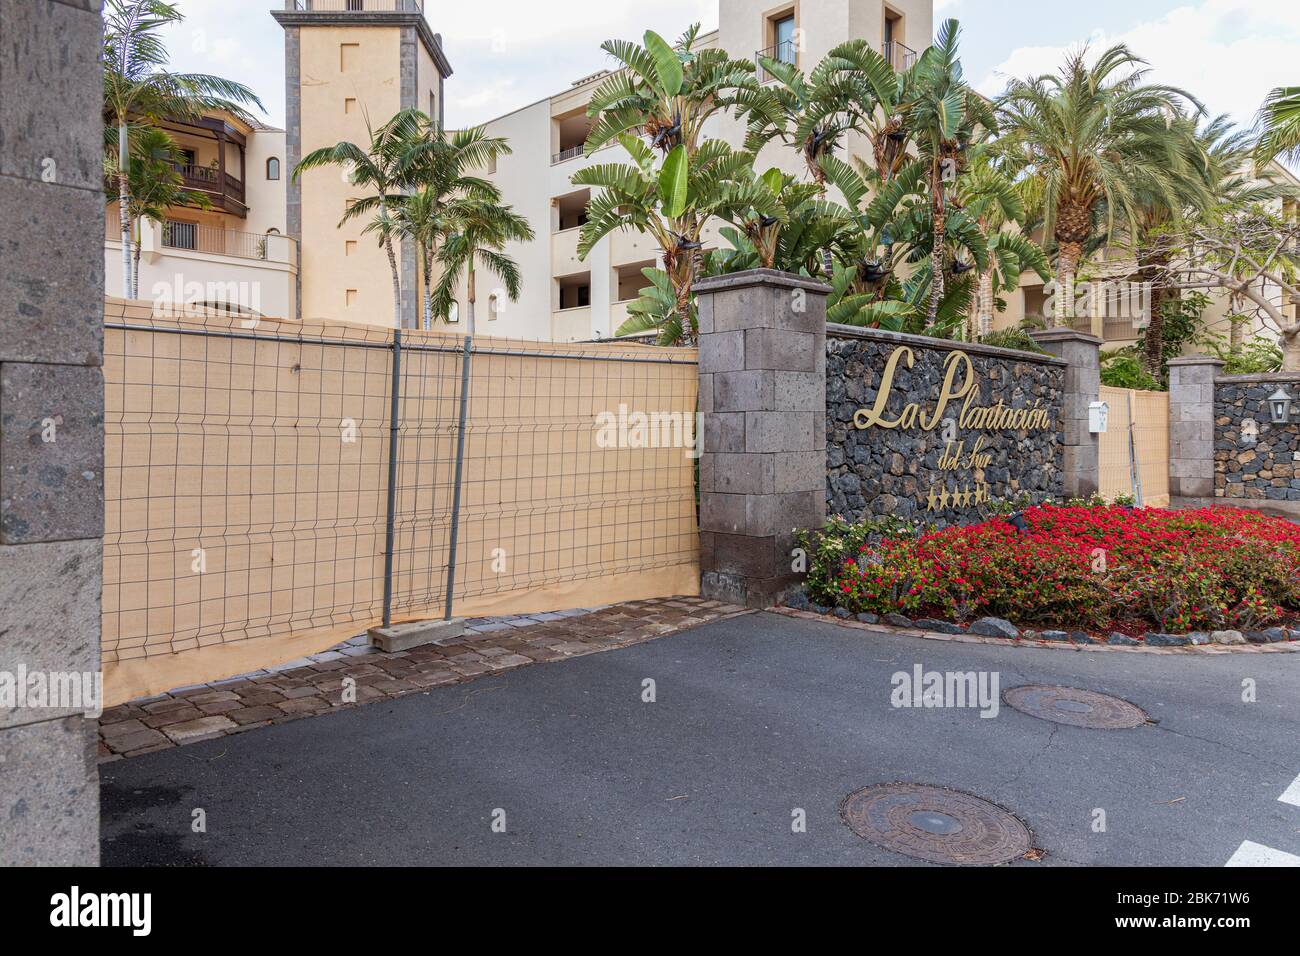 La Plantacion del Sur hotel sealed with temporary fencing during the covid 19 lockdown in the tourist resort area of Costa Adeje, Tenerife, Canary Isl Stock Photo